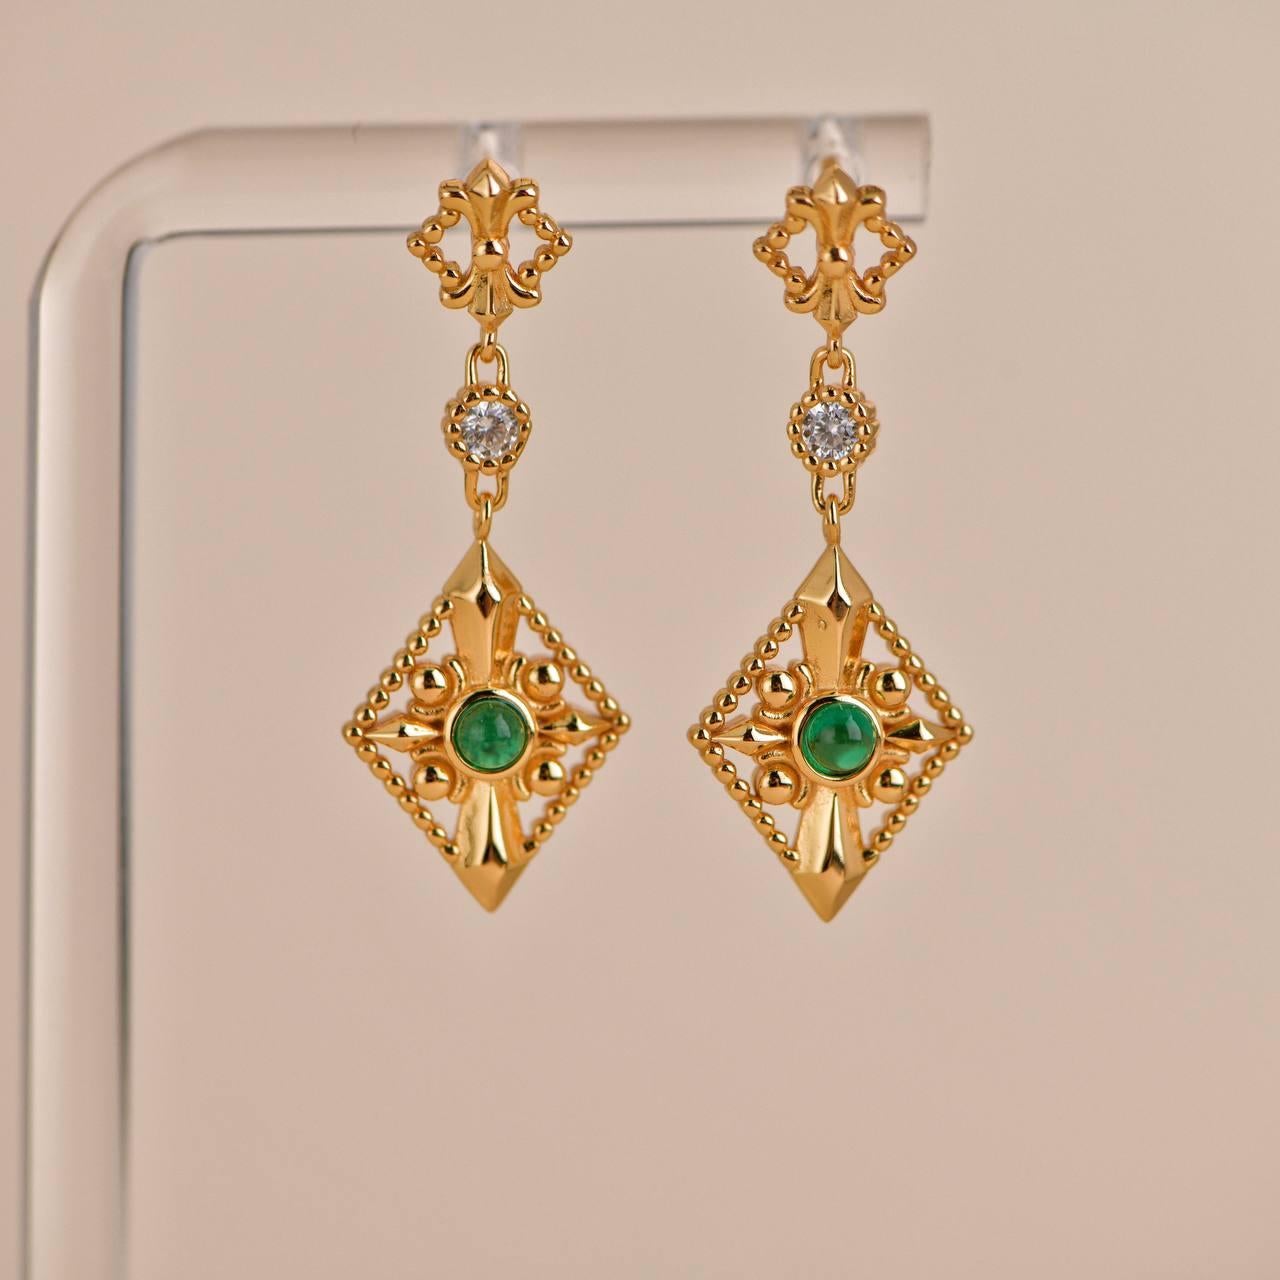 SKU: FT-0019
Material: 18K Gold Plate
Size: Approx. 32*12mm
